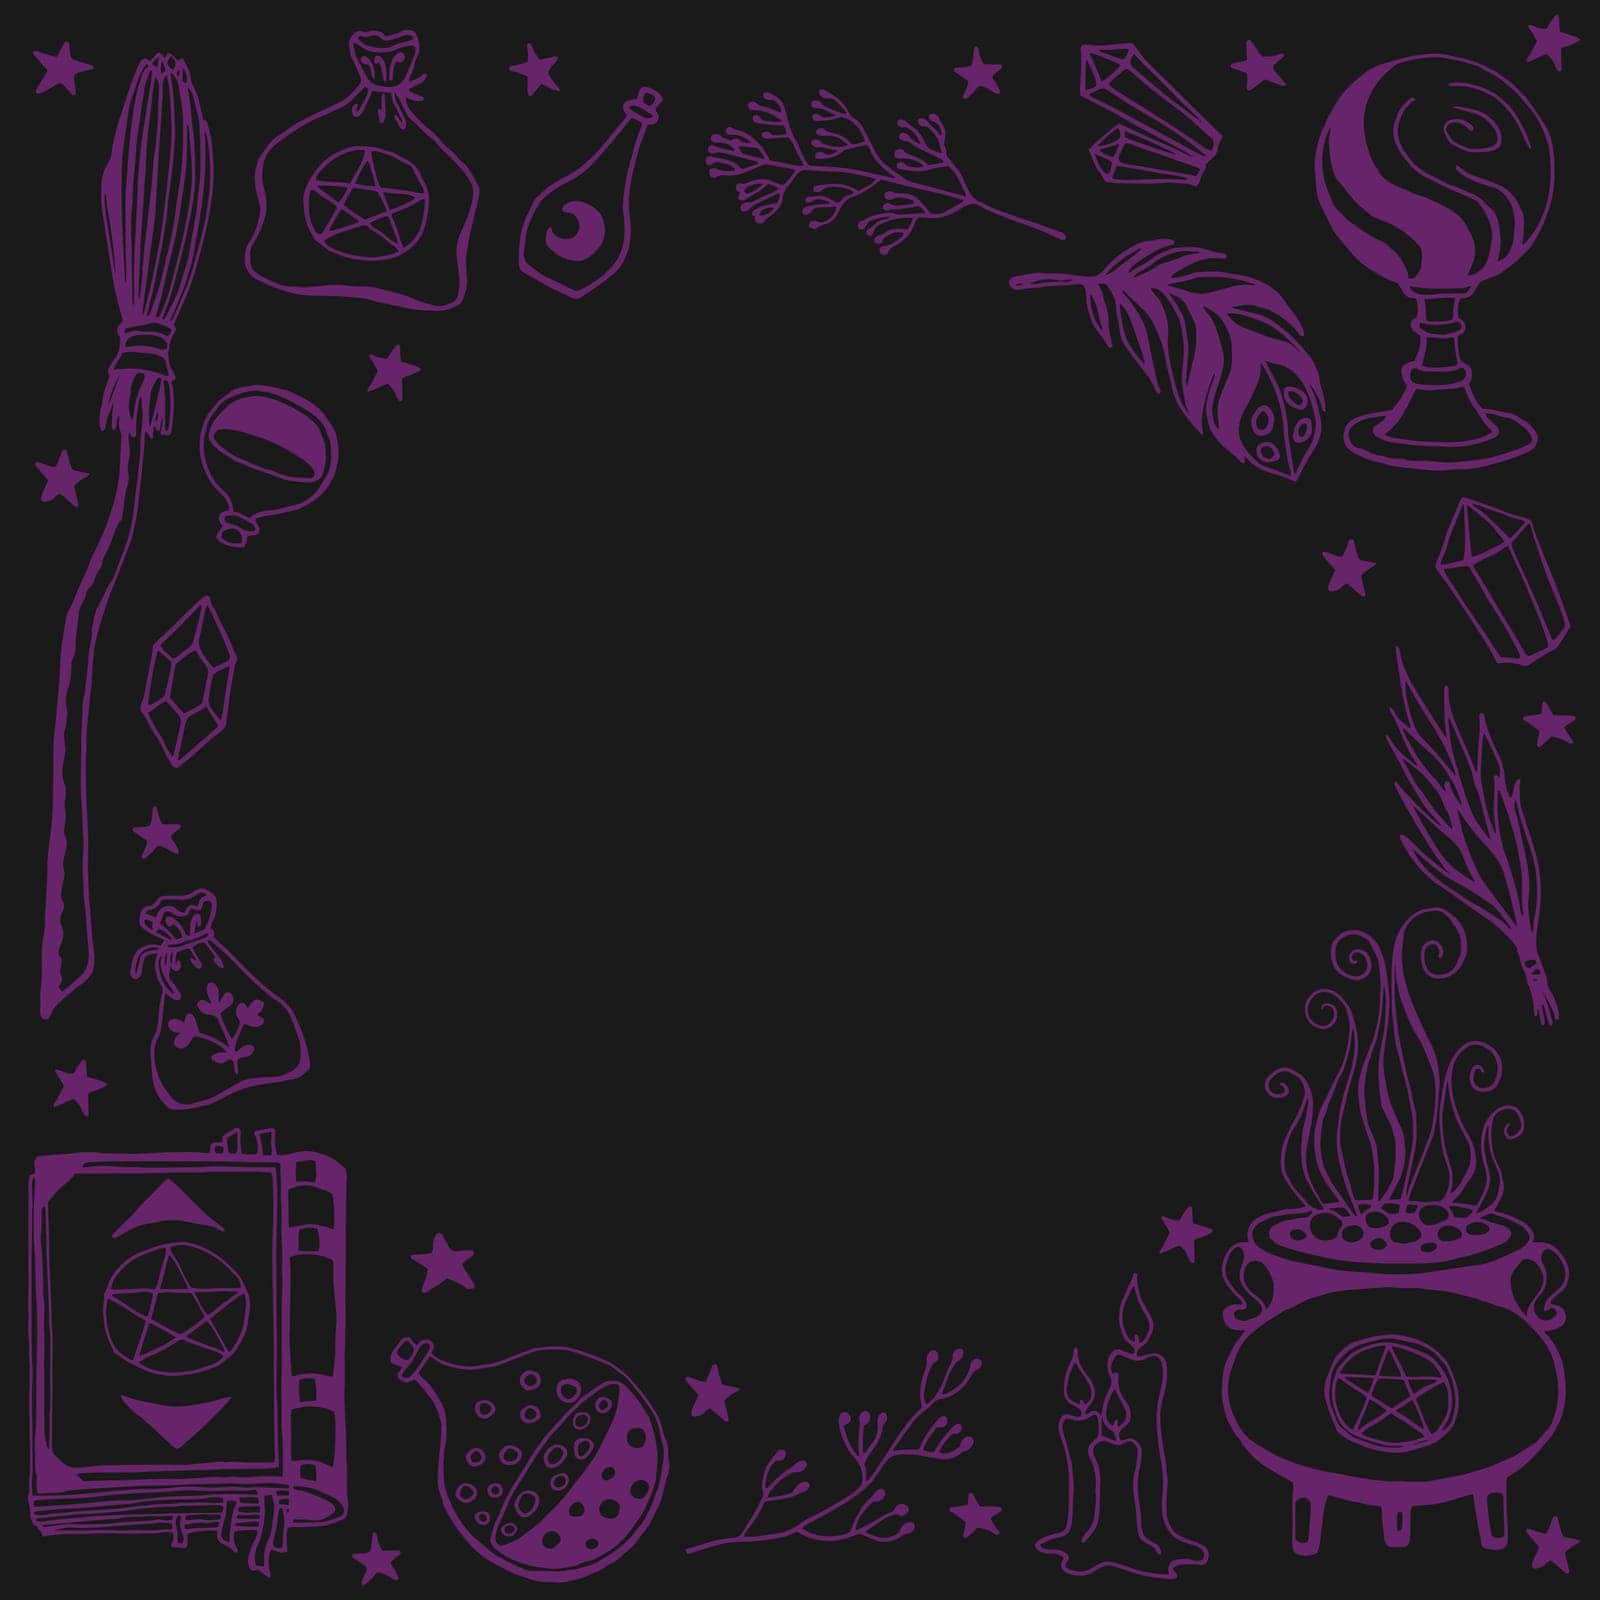 Witchcraft, magic background for witches and wizards. Hand drawn magic tools, concept of witchcraft.